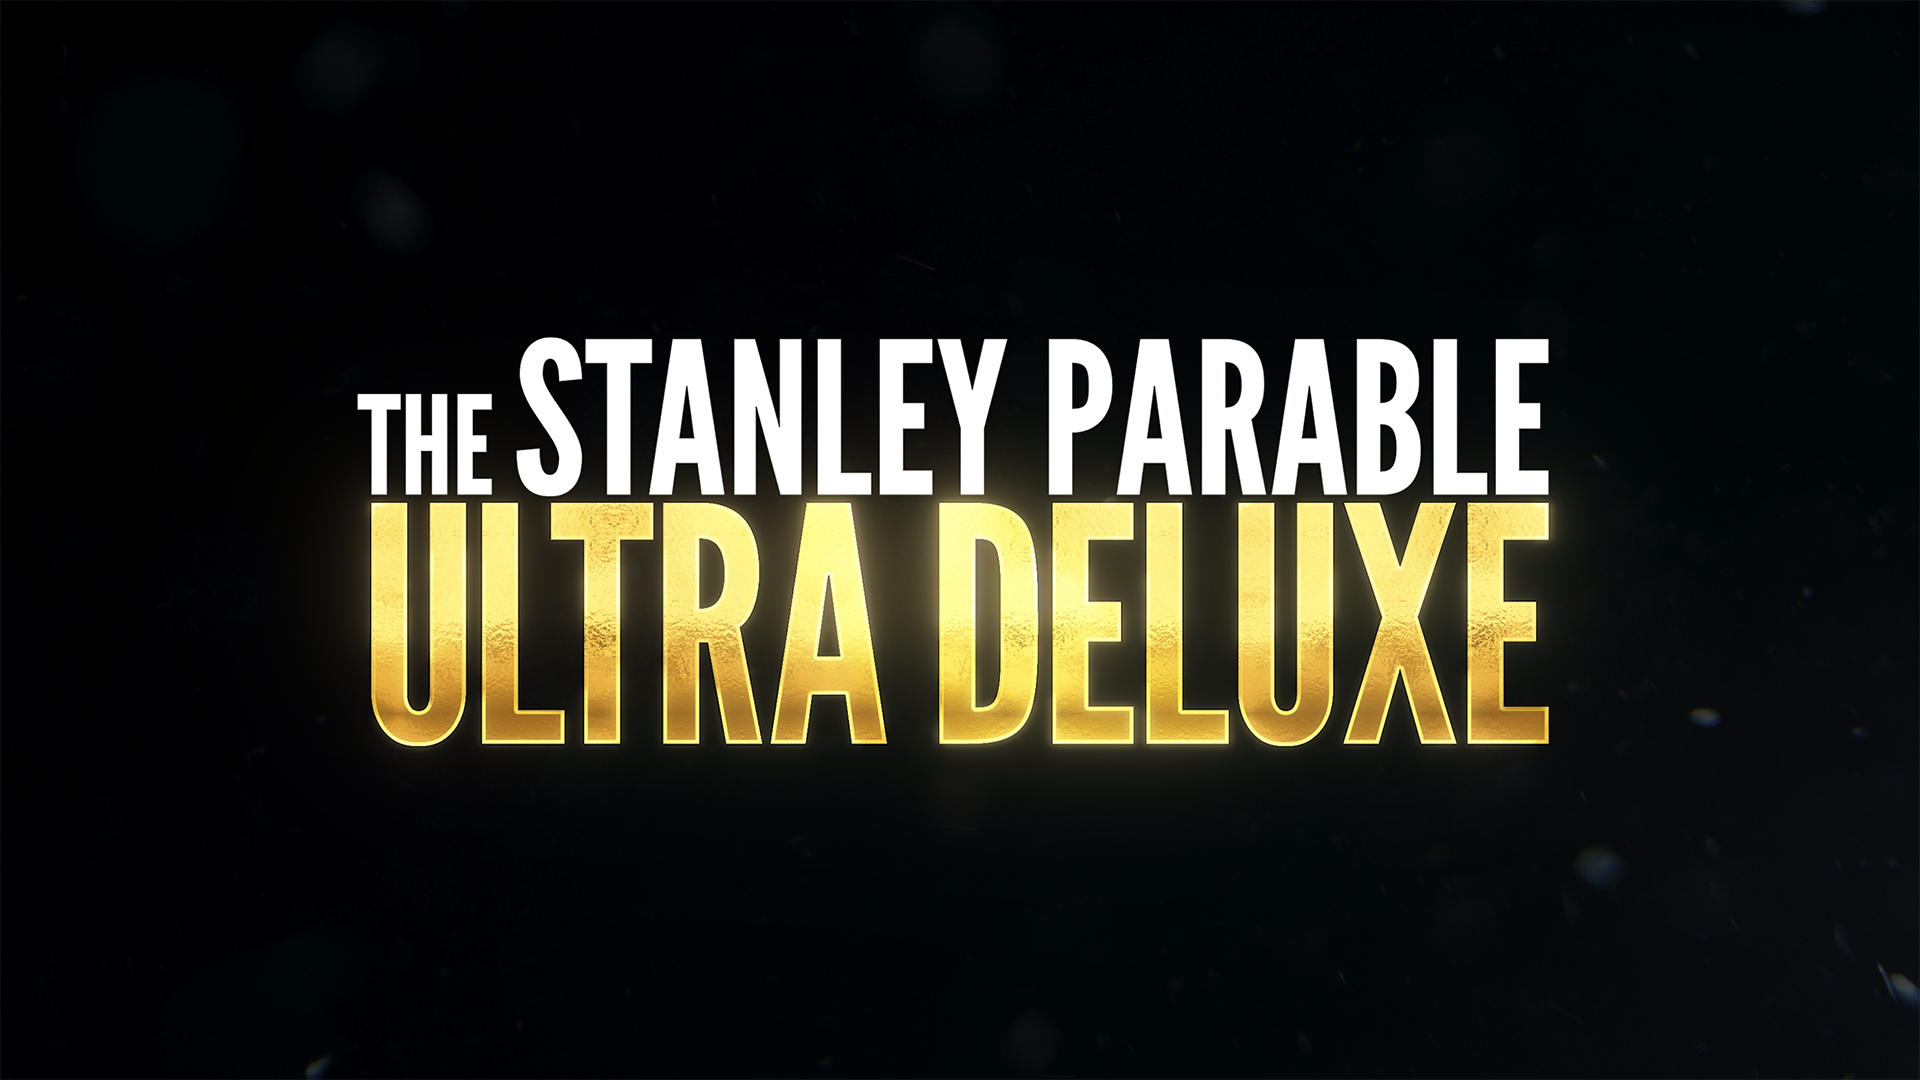 Parable ultra deluxe. The Stanley Parable: Ultra Deluxe. The Stanley Parable Ultra Deluxe ps4. The Stanley Parable: Ultra Deluxe ps4 диск. Stanley Parable Ultra Deluxe Nintendo Switch.